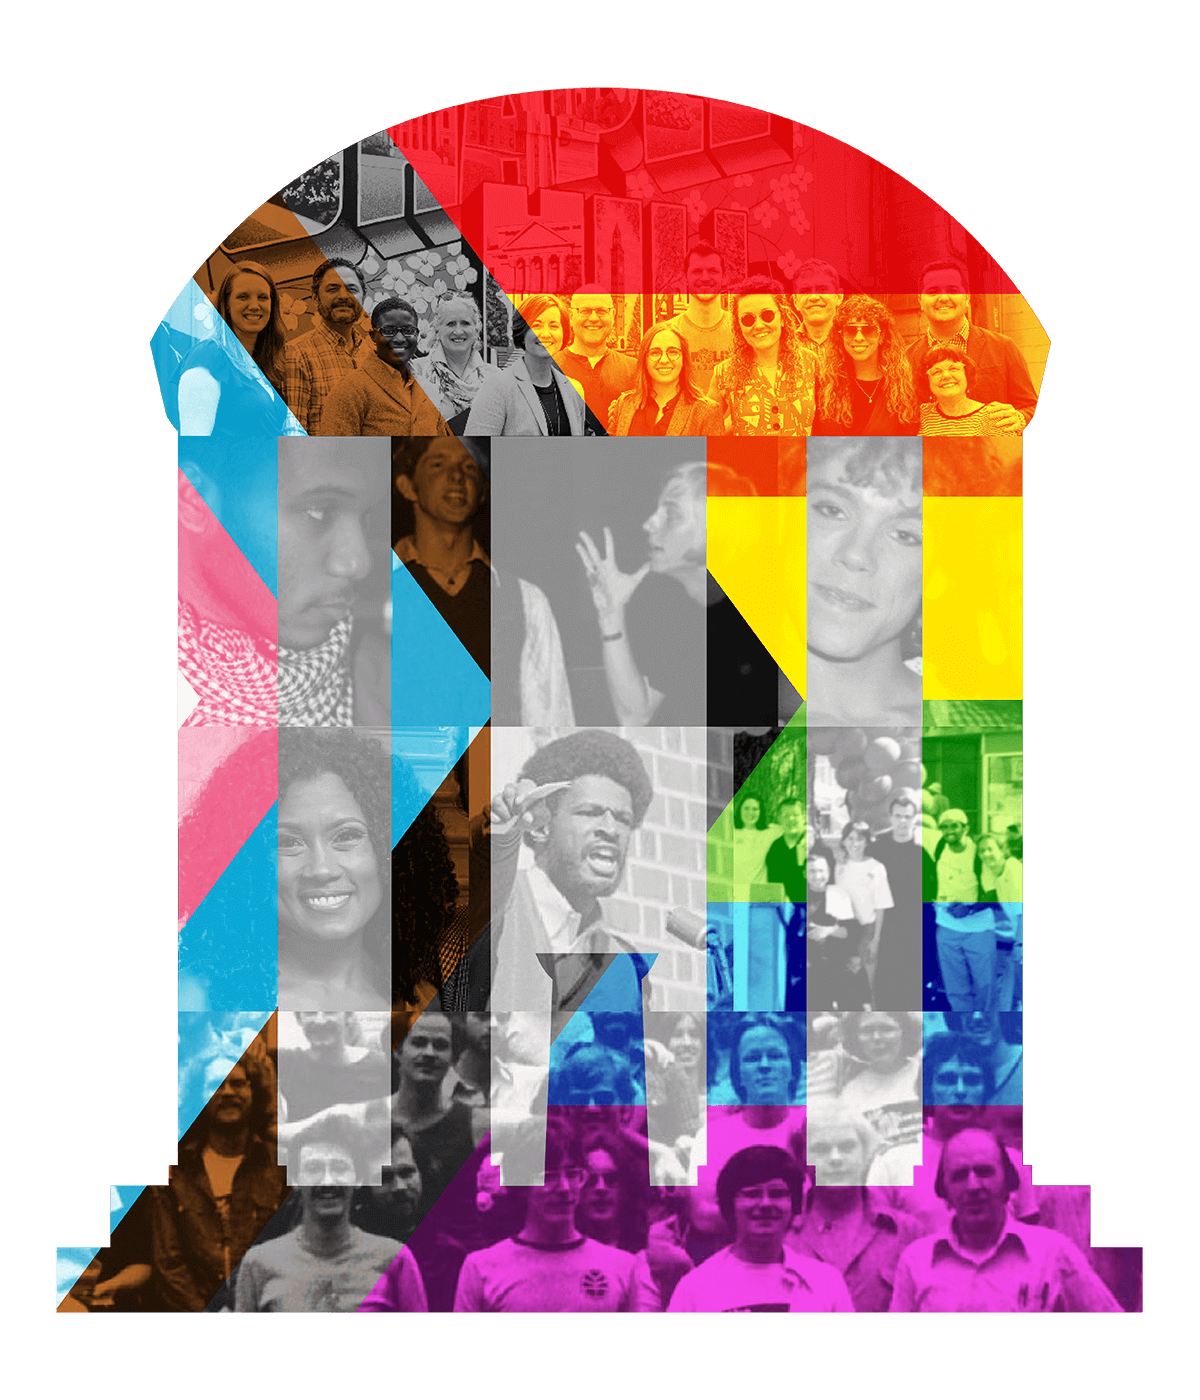 Archival photos of Carolina alumni overlayed on an image of the Old Well with rainbow colors